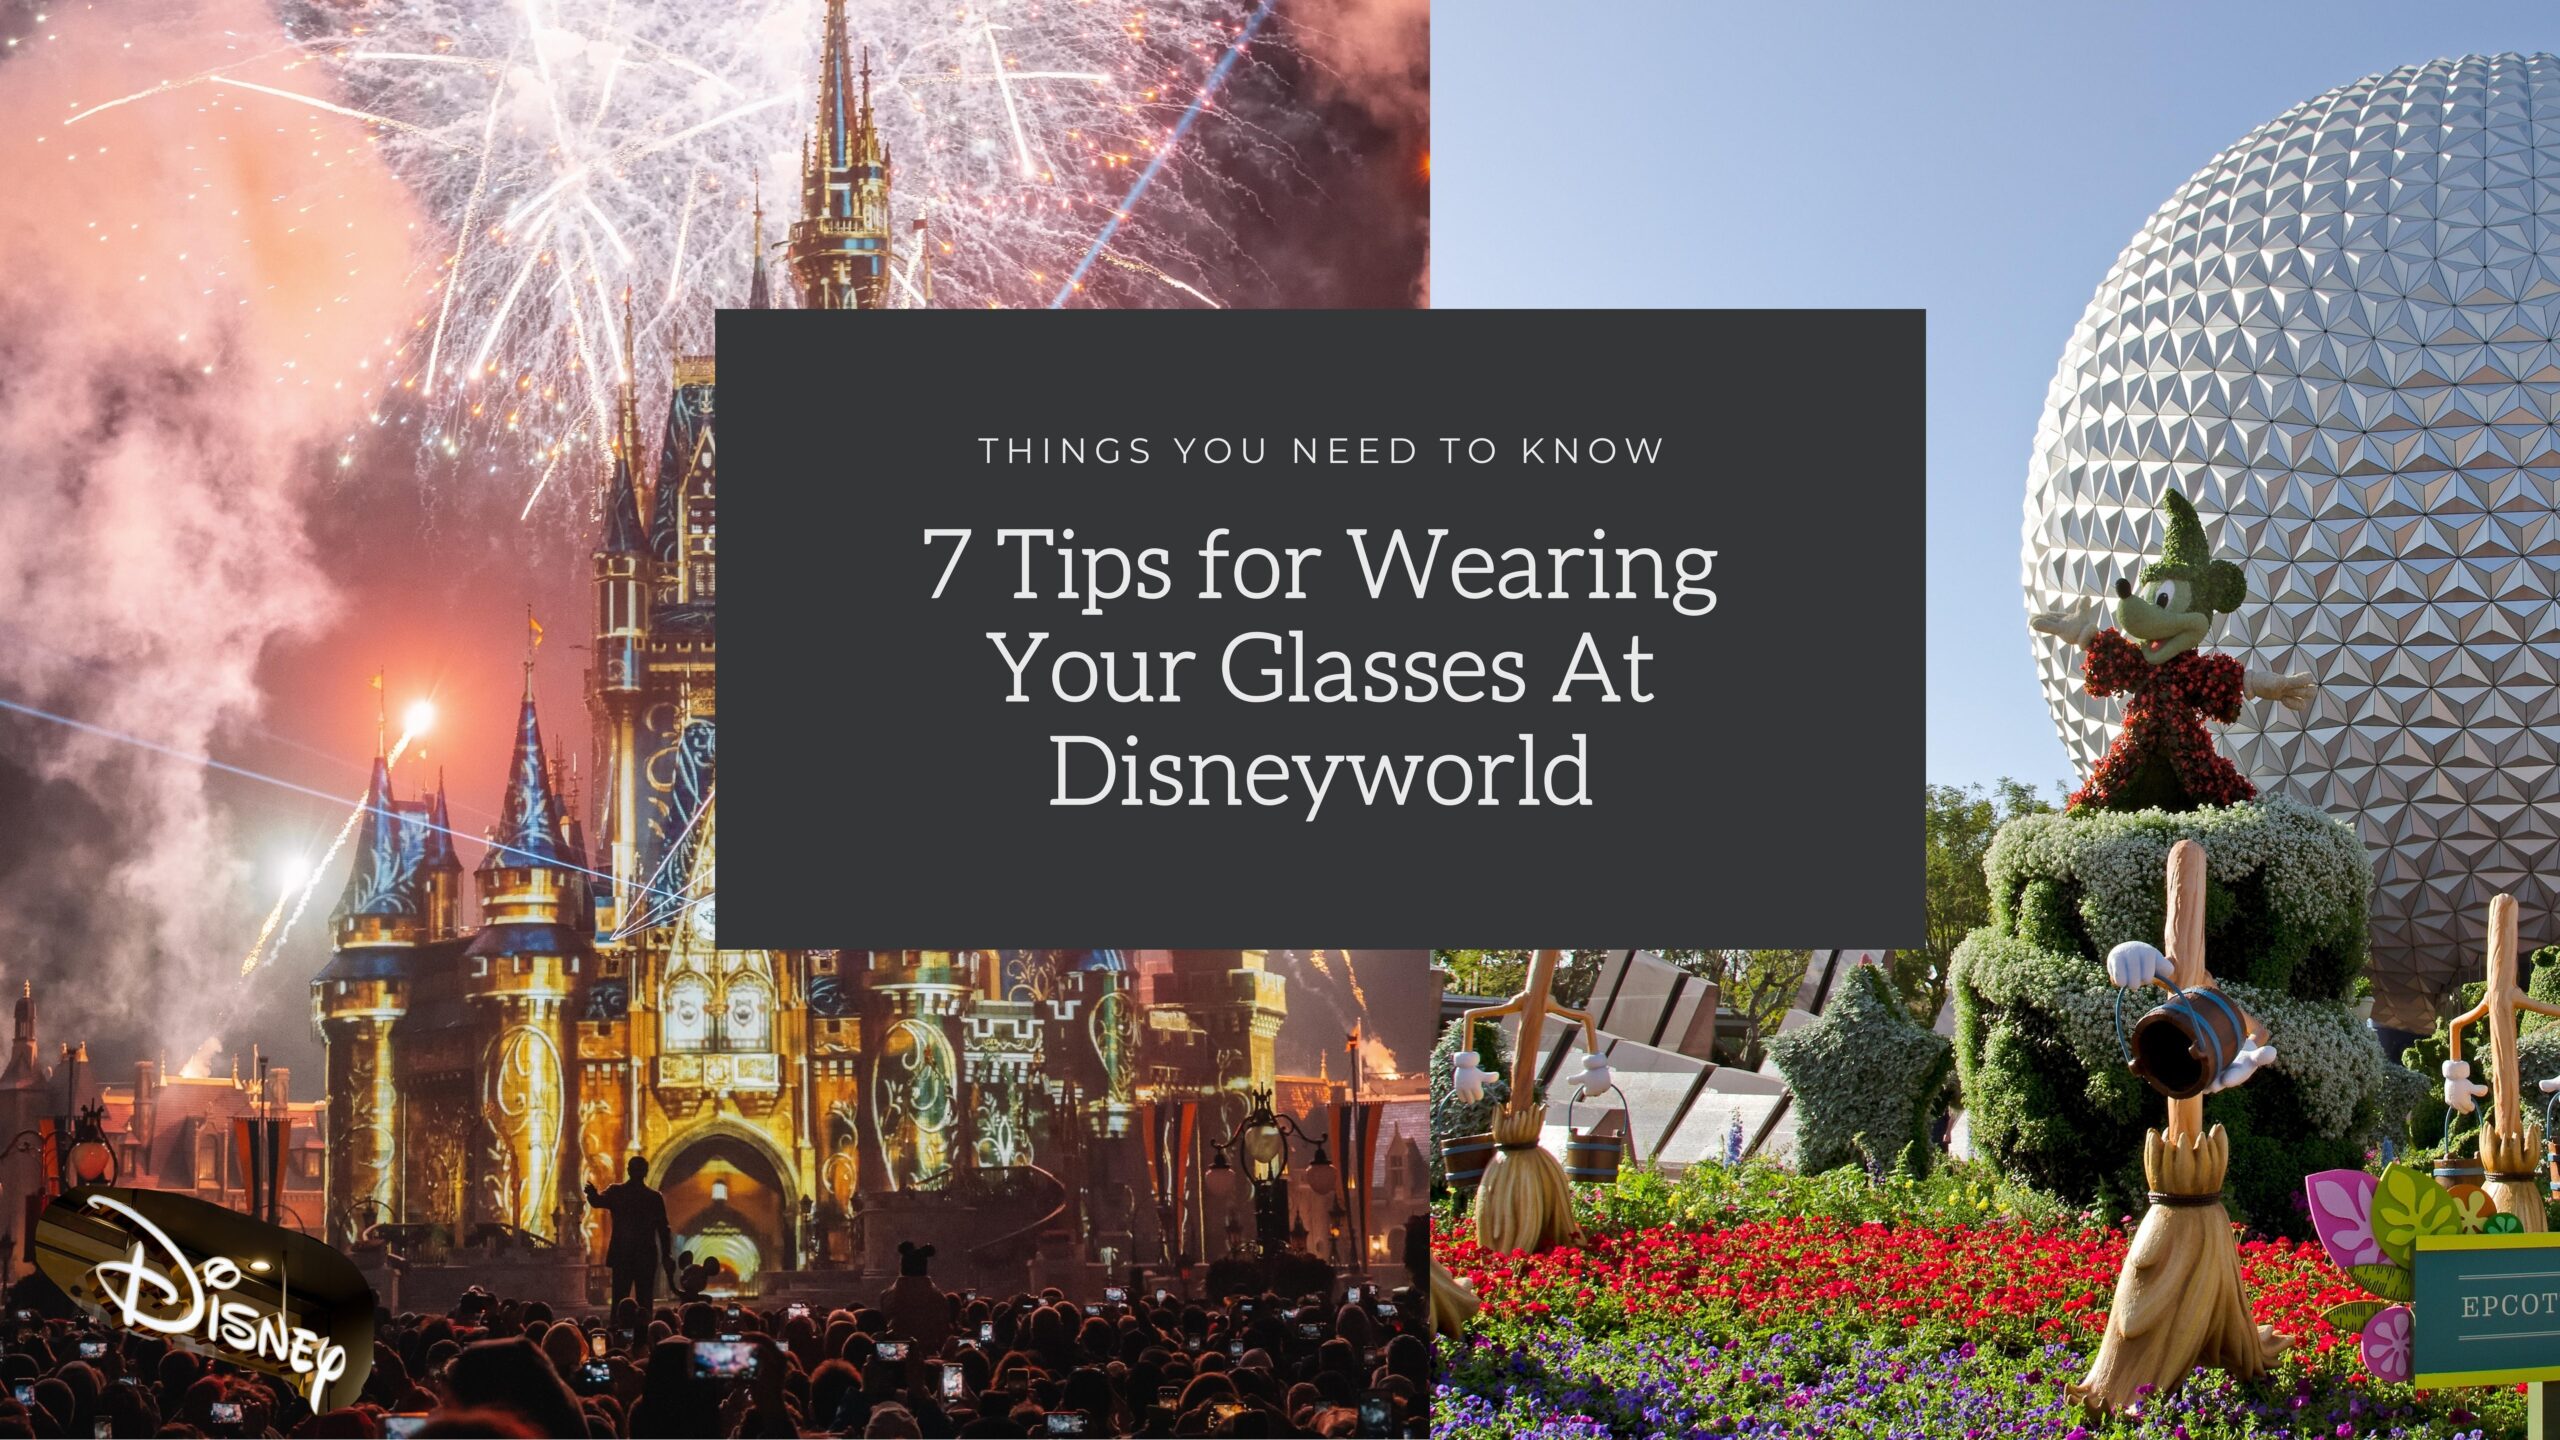 disneyworld castle with a text graphic that reads '7 tips for wearing your glasses at Disneyworld'